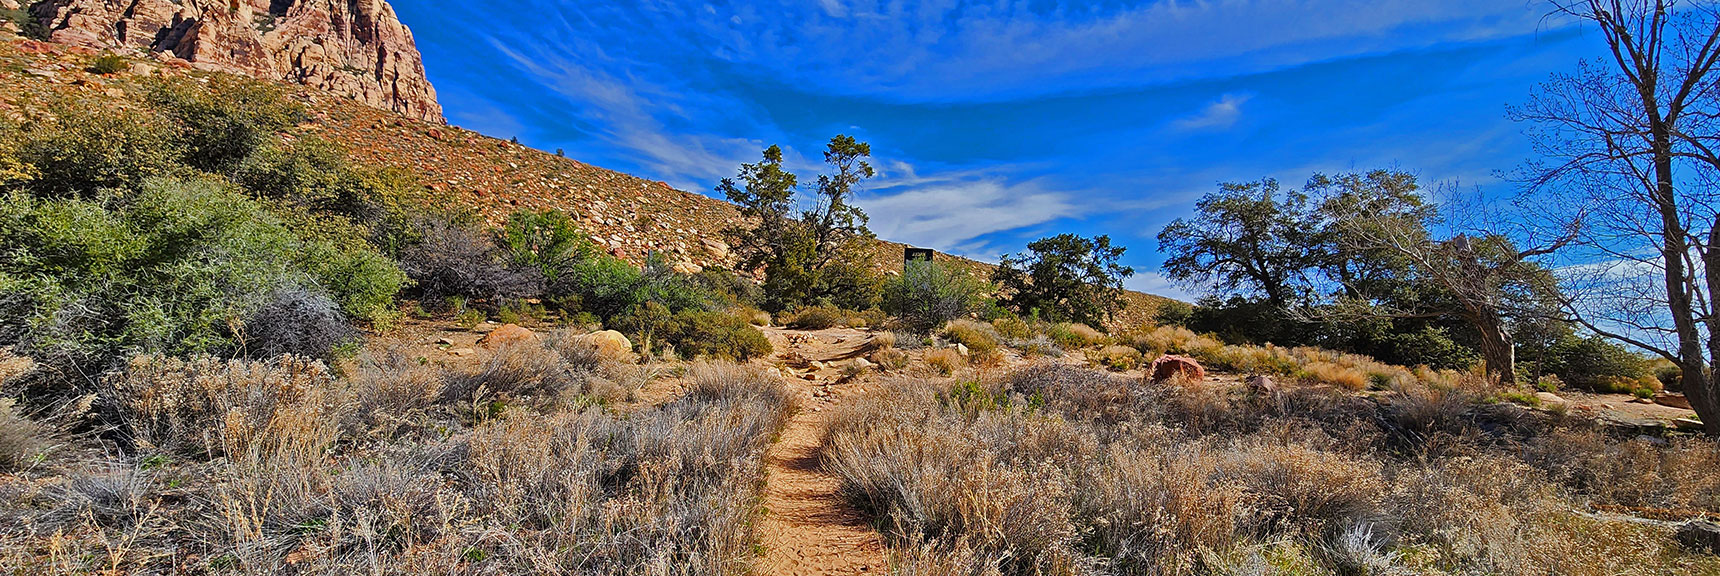 Approaching Knoll Trail Northern Trailhead in Pine Creek Canyon | Knoll Trail | Red Rock Canyon National Conservation Area, Nevada | David Smith | LasVegasAreaTrails.com